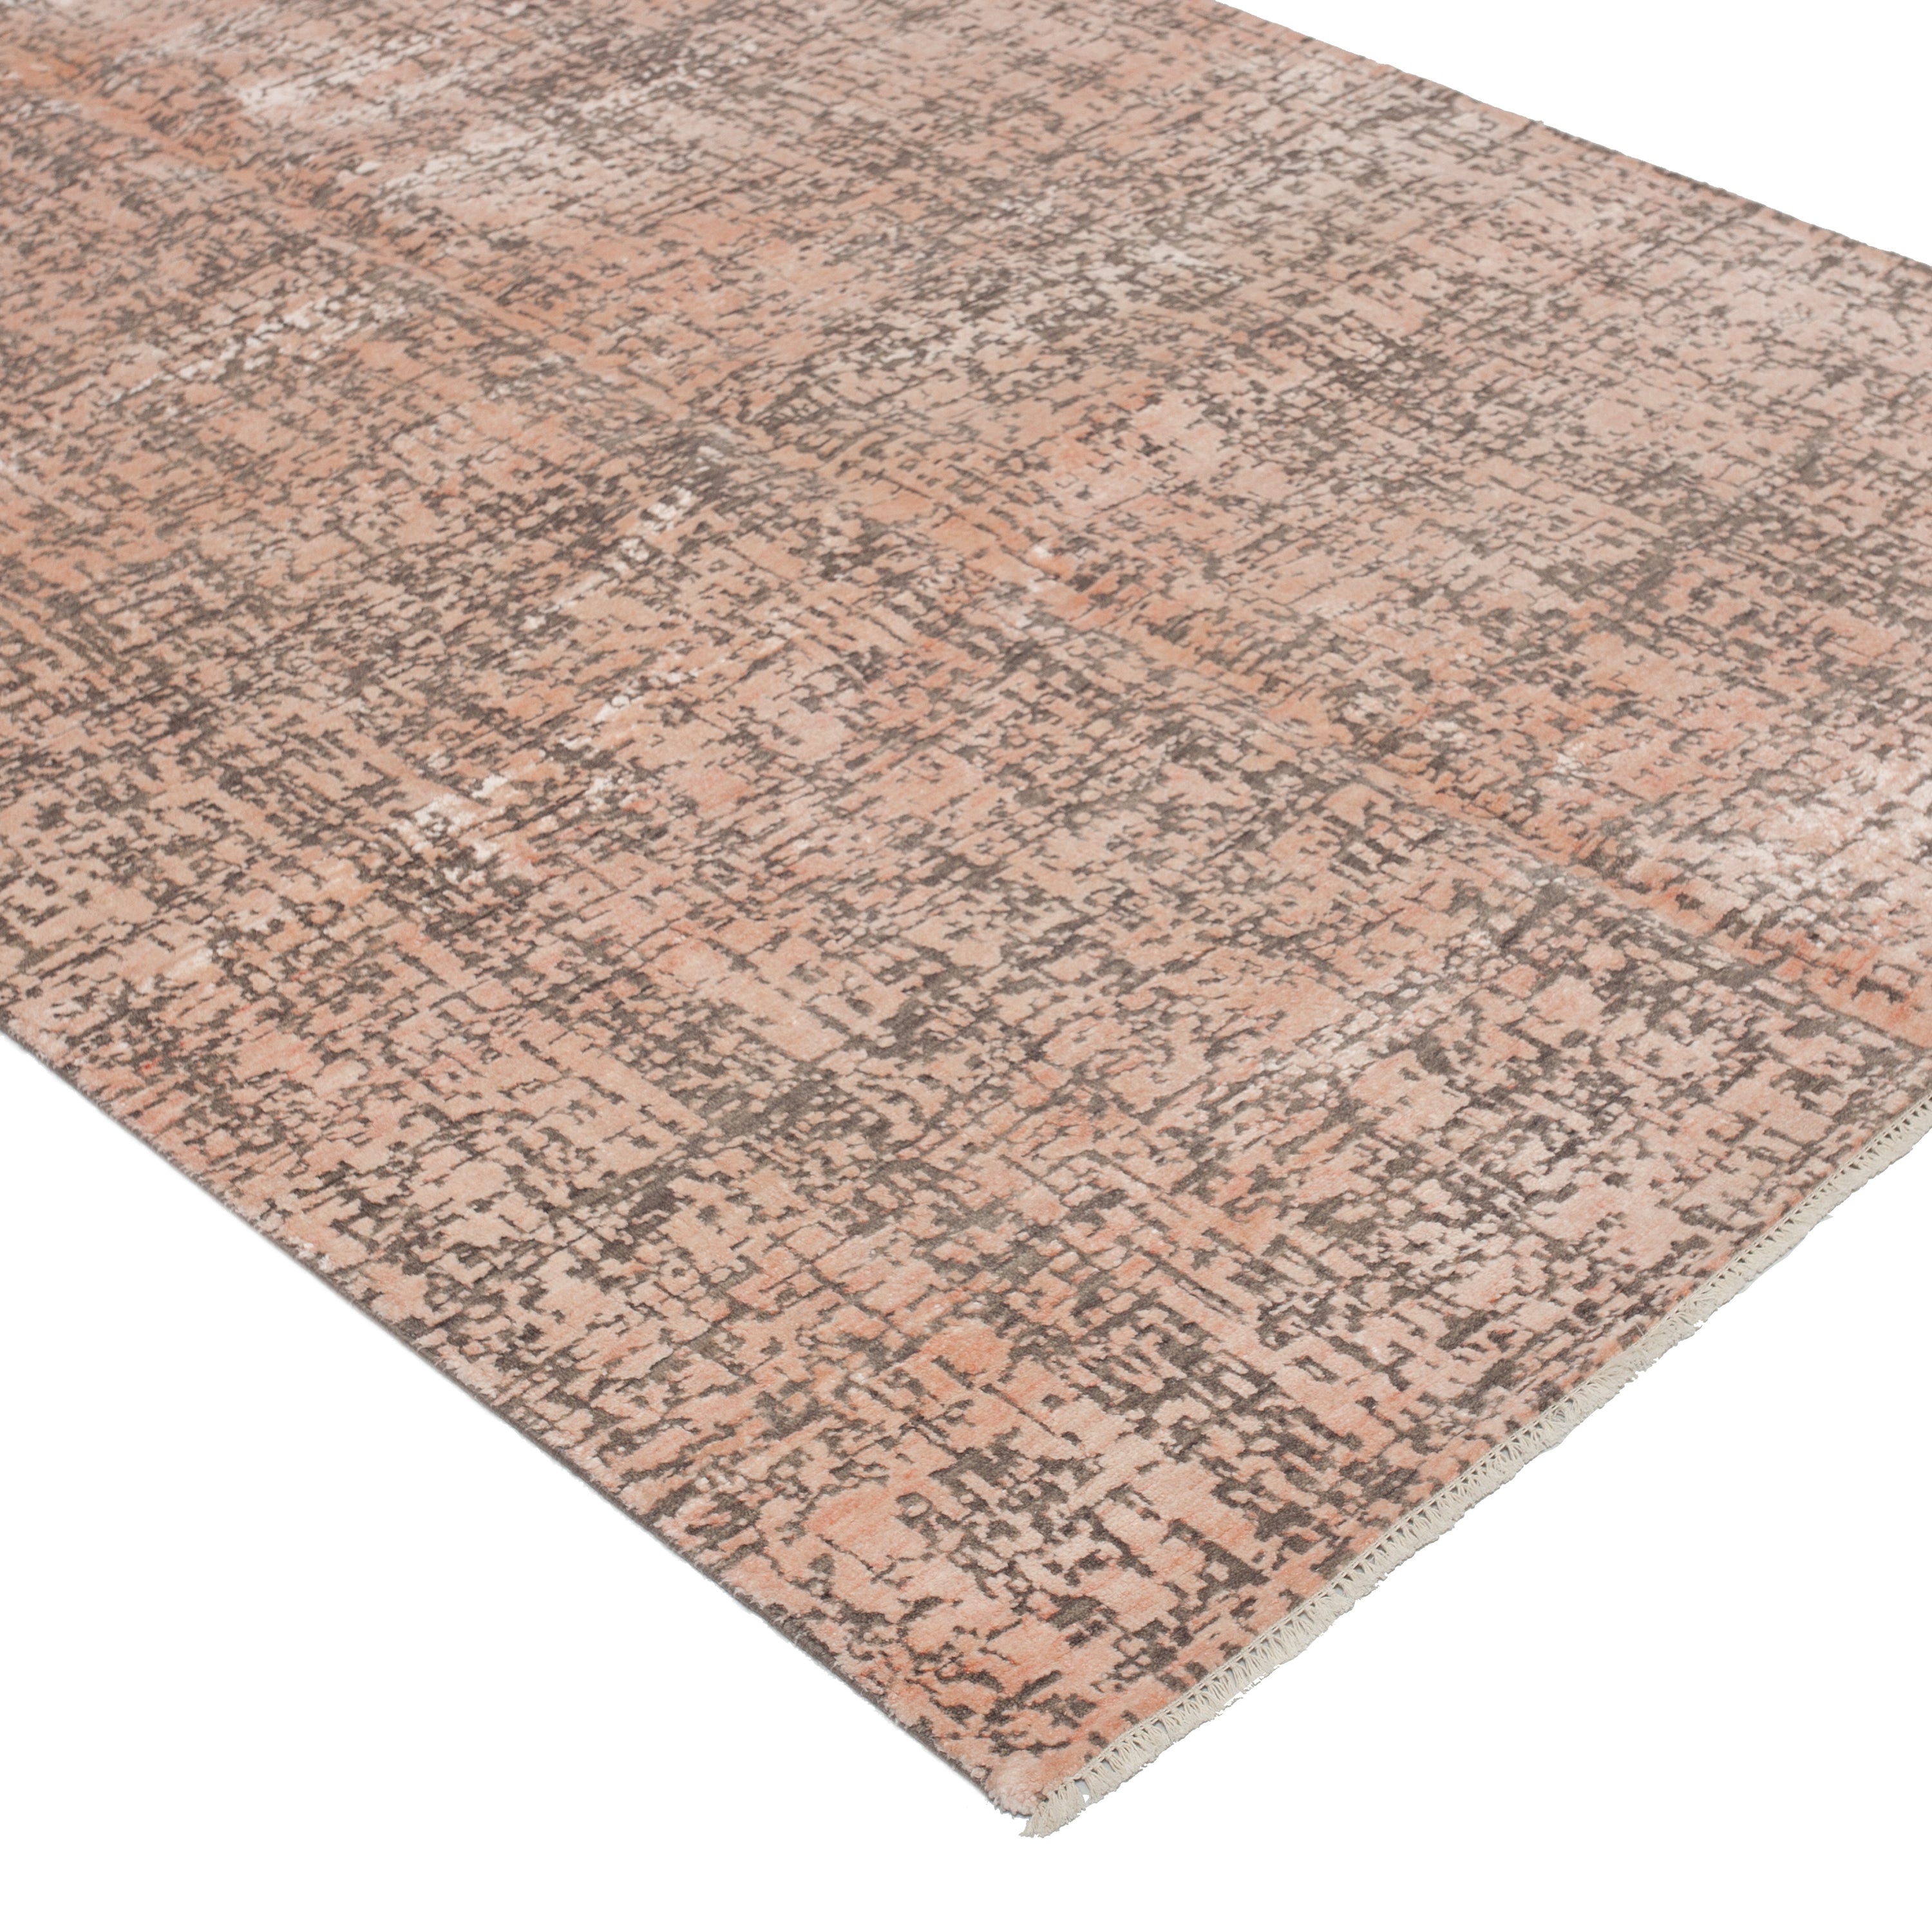 Hand-knotted Wool Rug - 8' x 5'1" Default Title